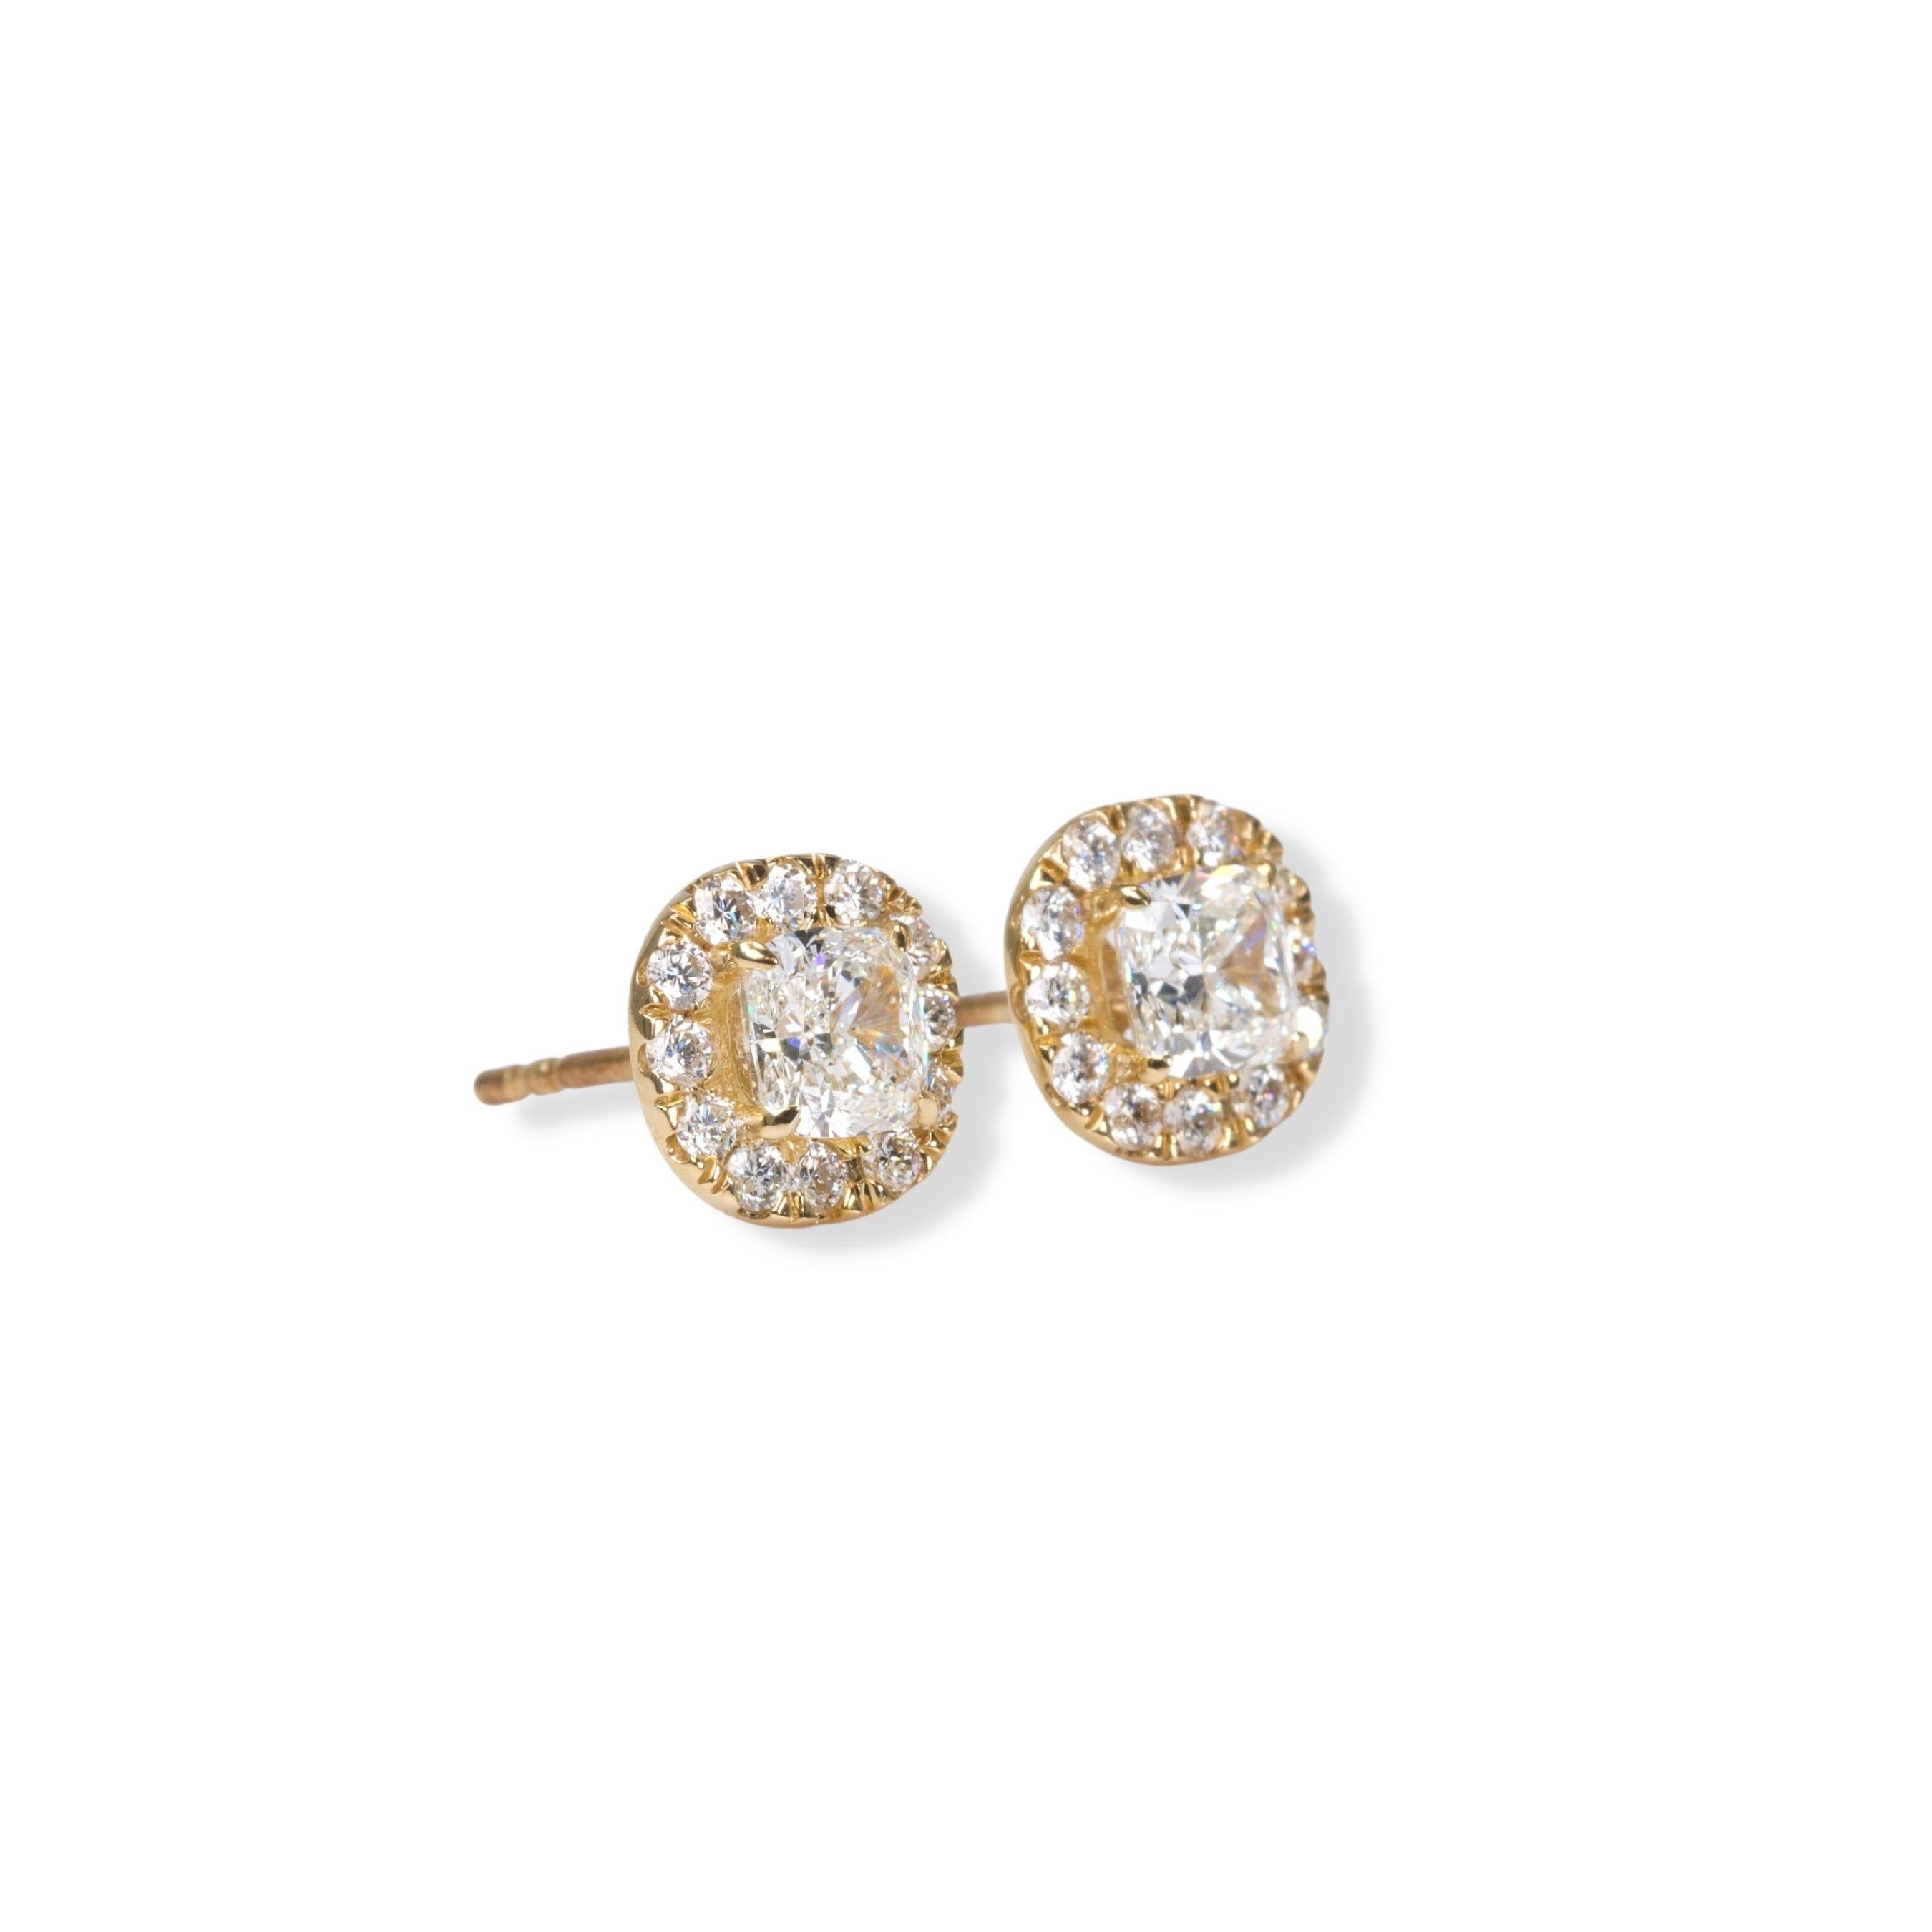 Sparkling 18k Yellow Gold Stud Halo Earrings with 1.40 Diamonds, GIA certificate In New Condition For Sale In רמת גן, IL